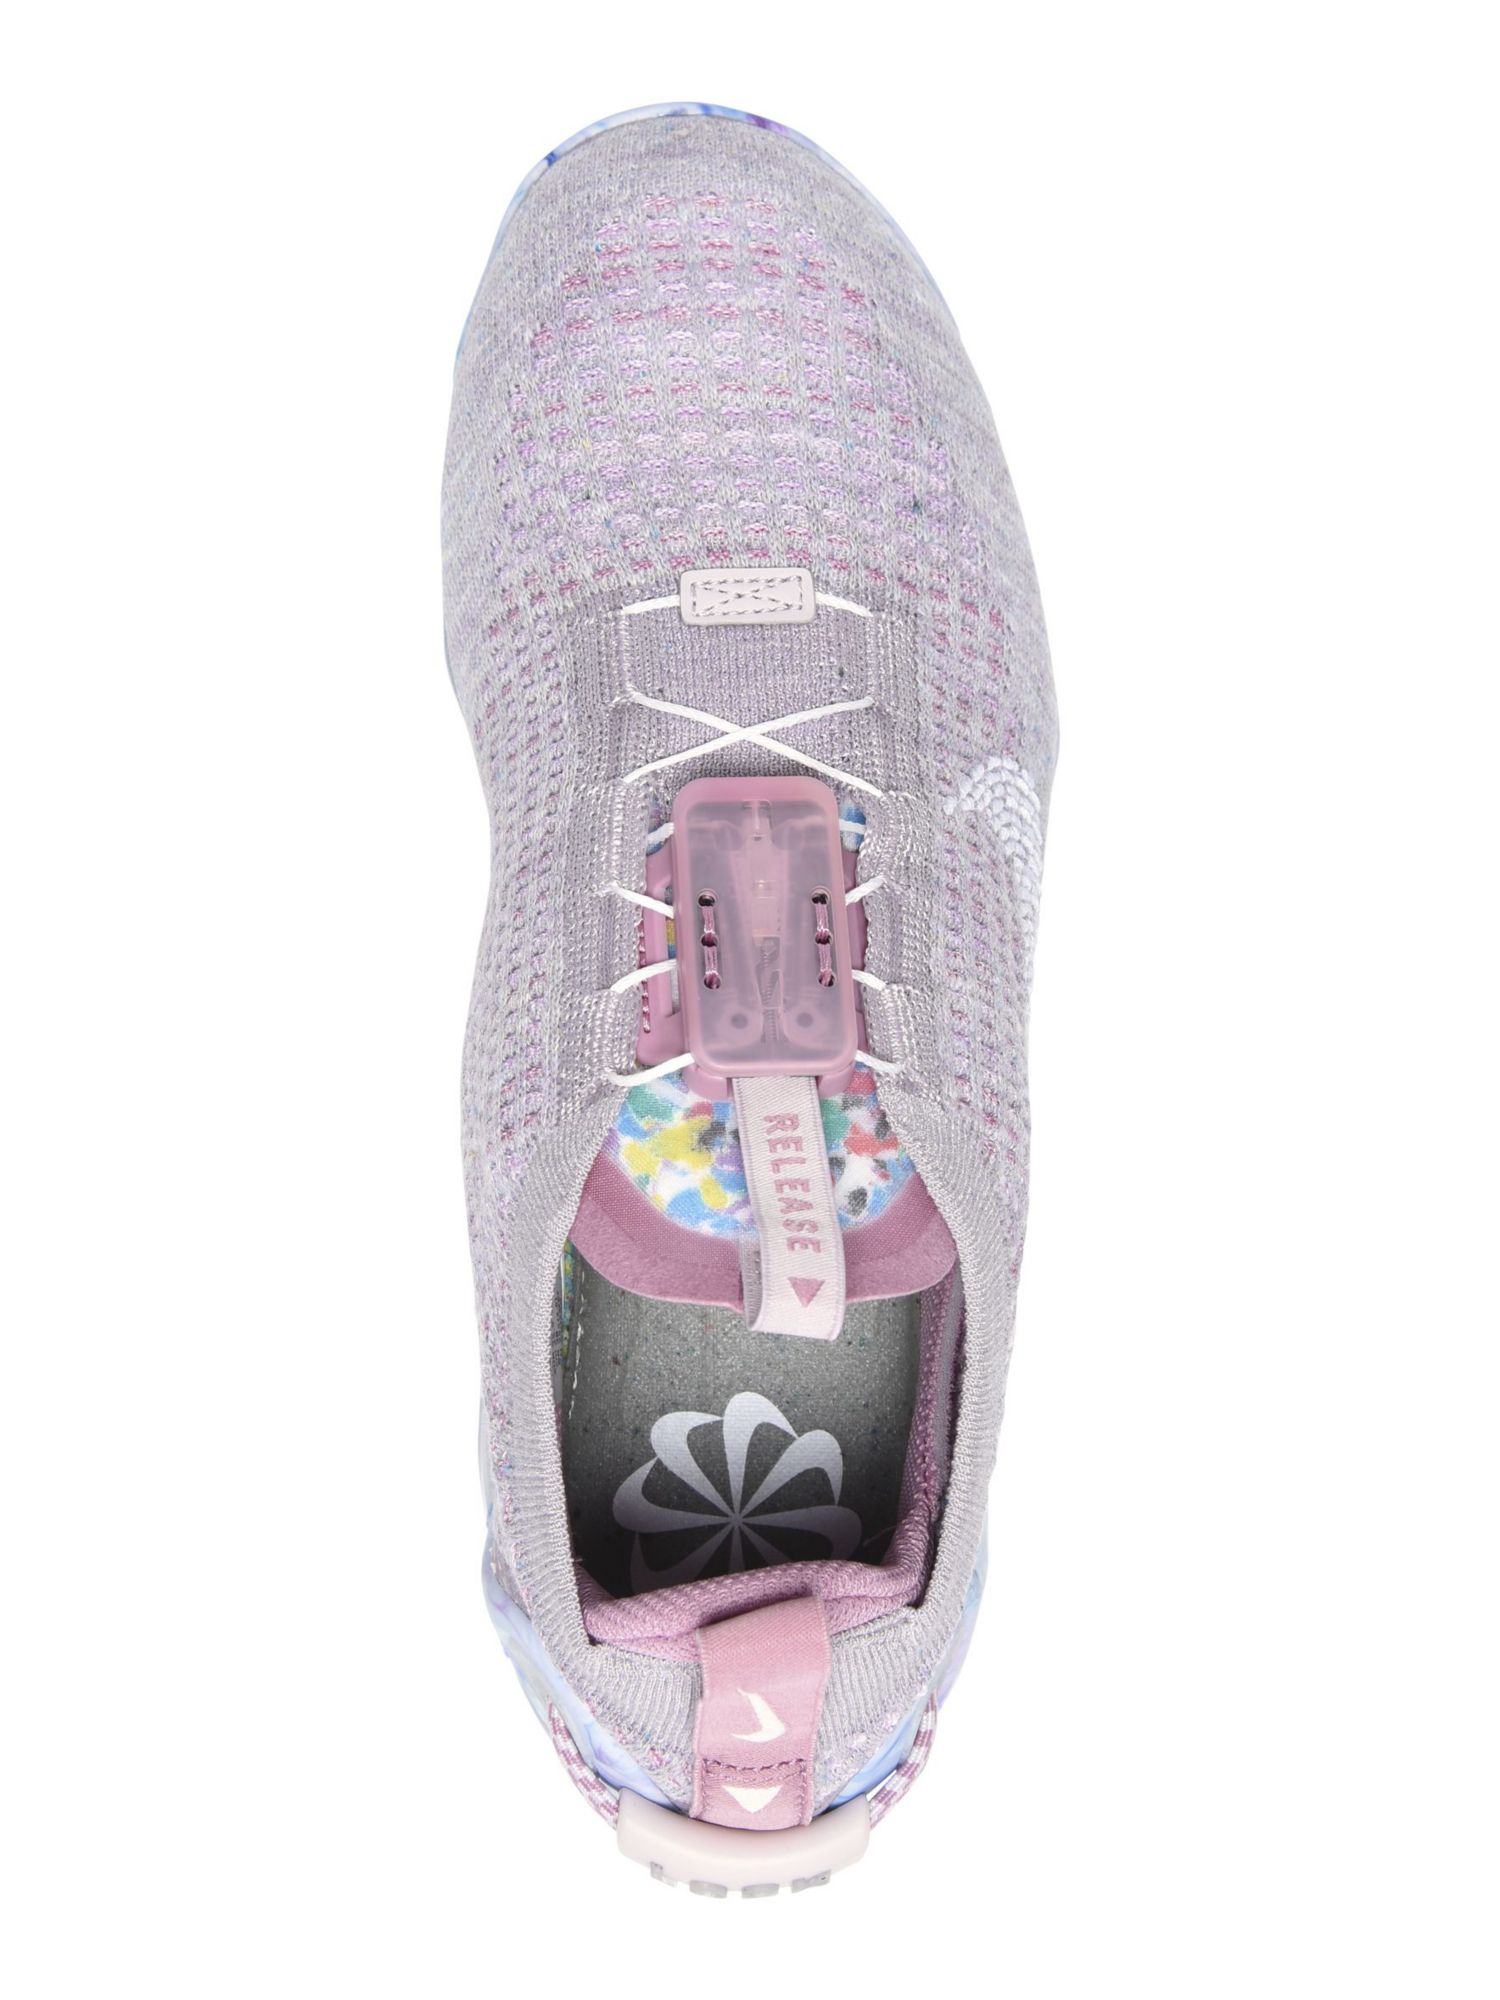 NIKE Womens Violet Ash/White Purple Flyknit Foam Tongue Cushioned Air Vapormax 2020 Round Toe Lace-Up Athletic Running Shoes 6